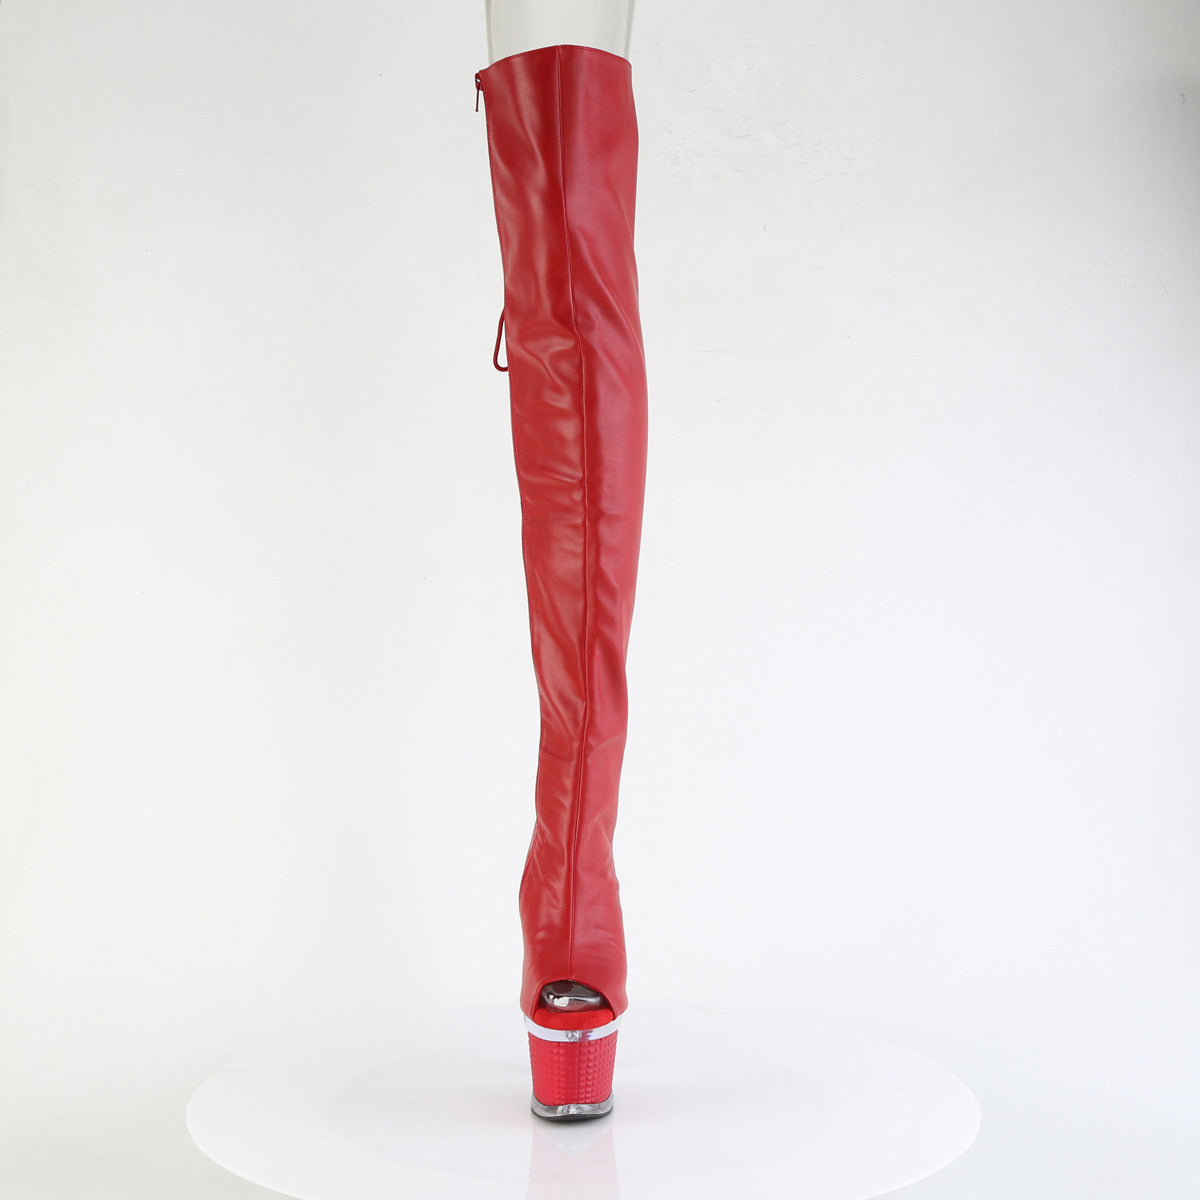 SPECTATOR-3030 Pleaser Red Pole Dancing Thigh High Boots